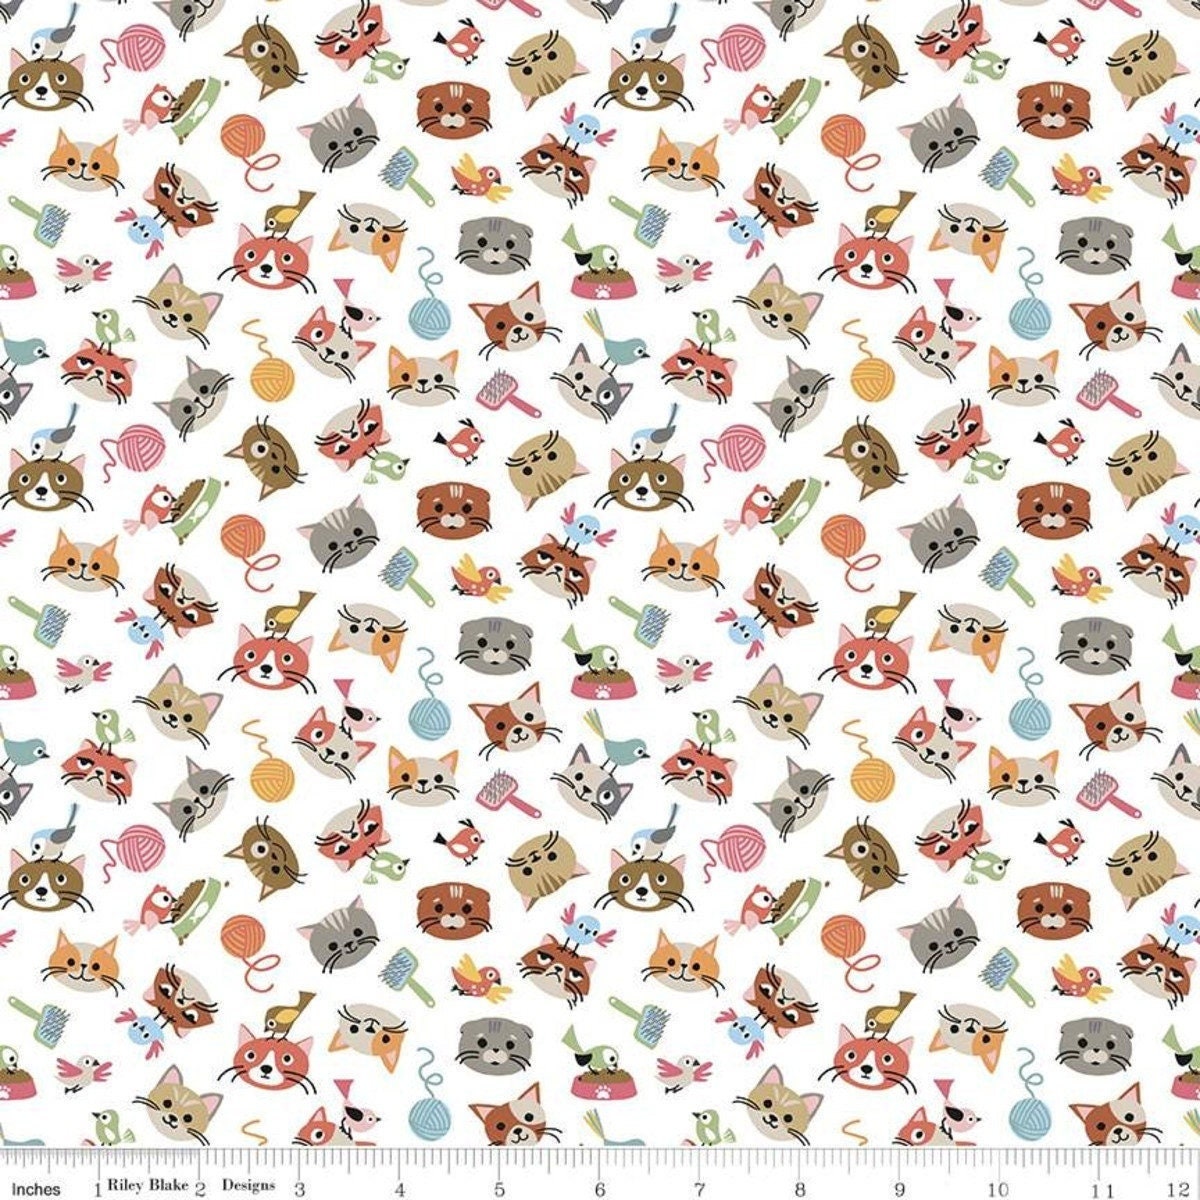 LAMINATED cotton fabric - Cat&#39;s Meow head toss (sold continuous by the half yard) Food Safe Fabric, BPA free